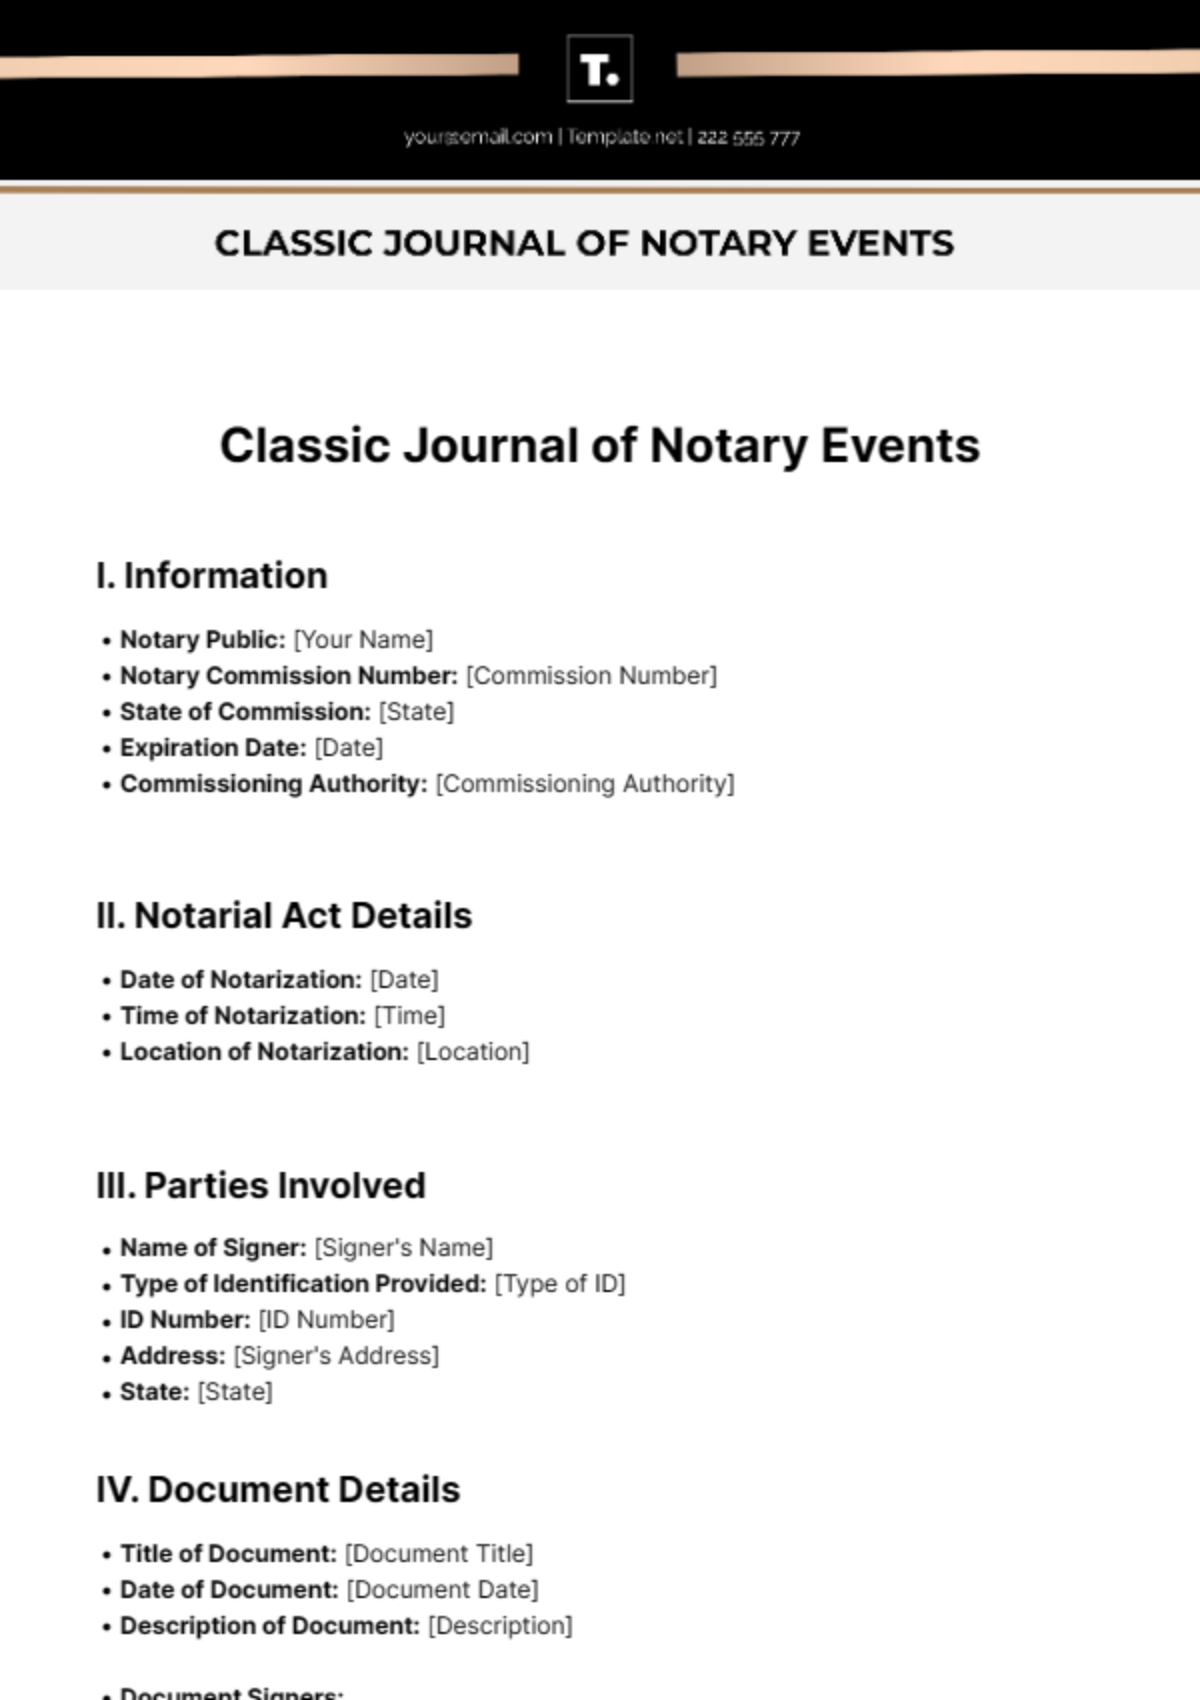 Classic Journal of Notary Events Template